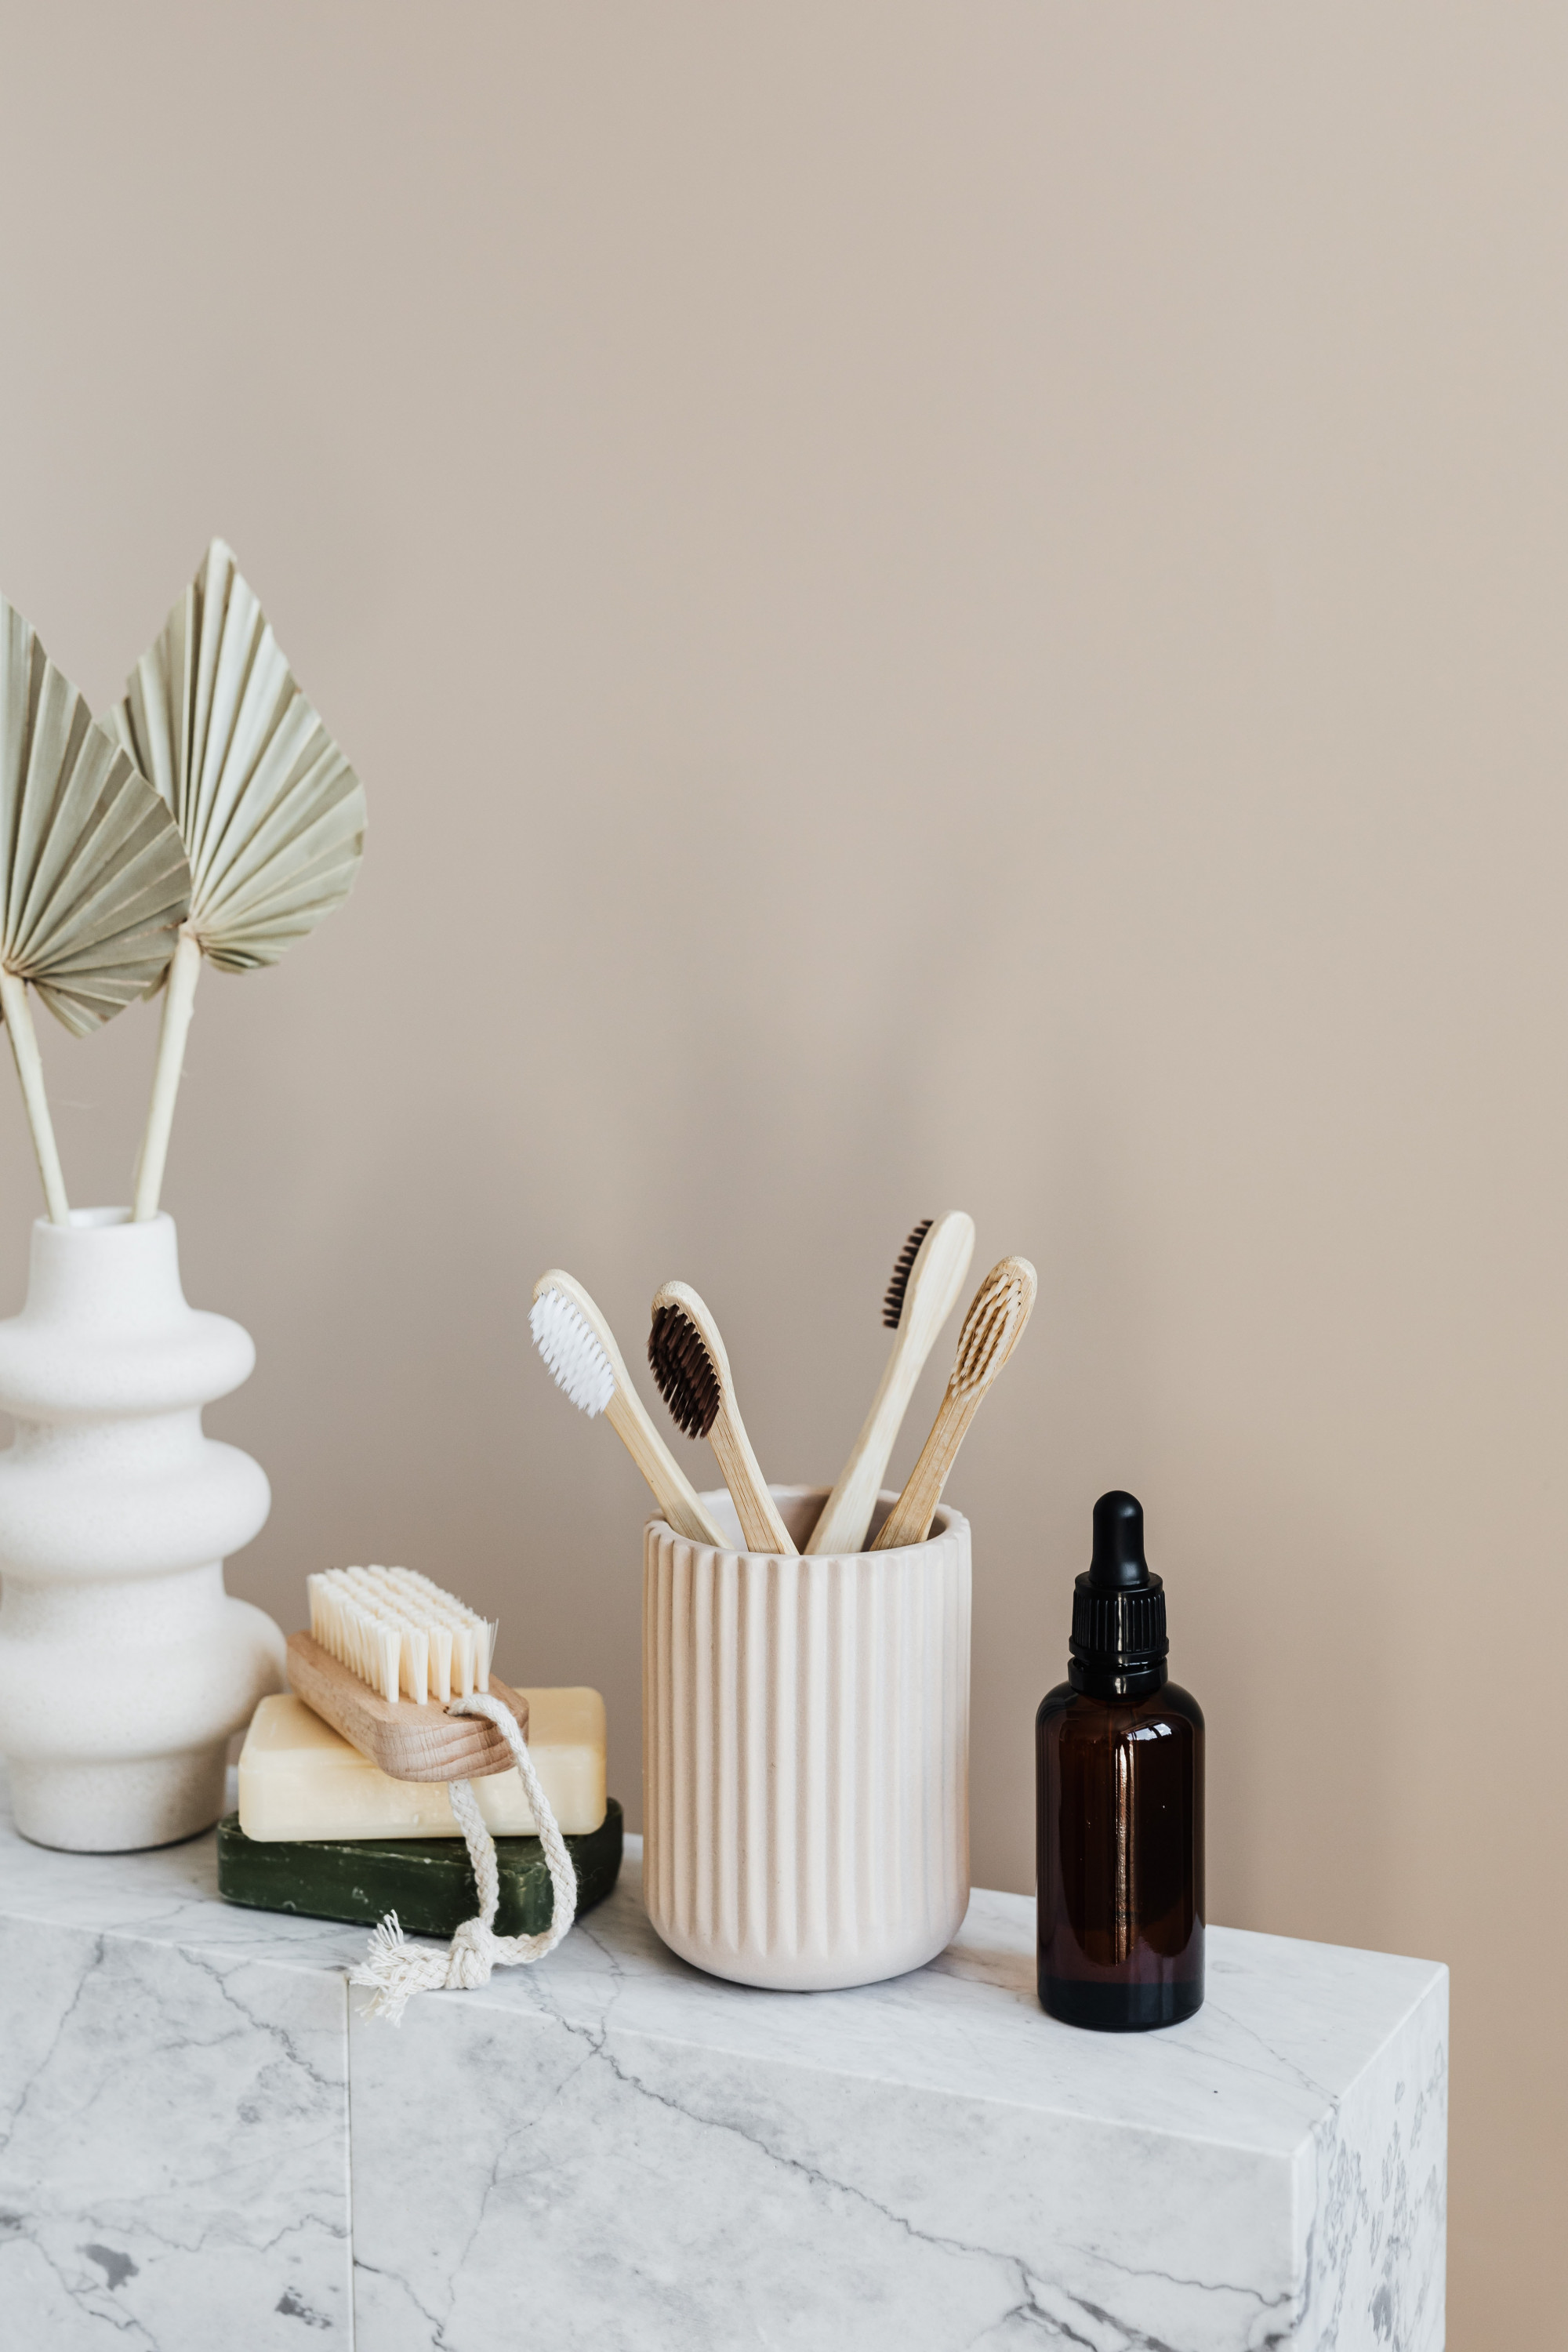 A shot of four bamboo toothbrushes in a ceramic holder, alongside a serum bottle and a nail brush.